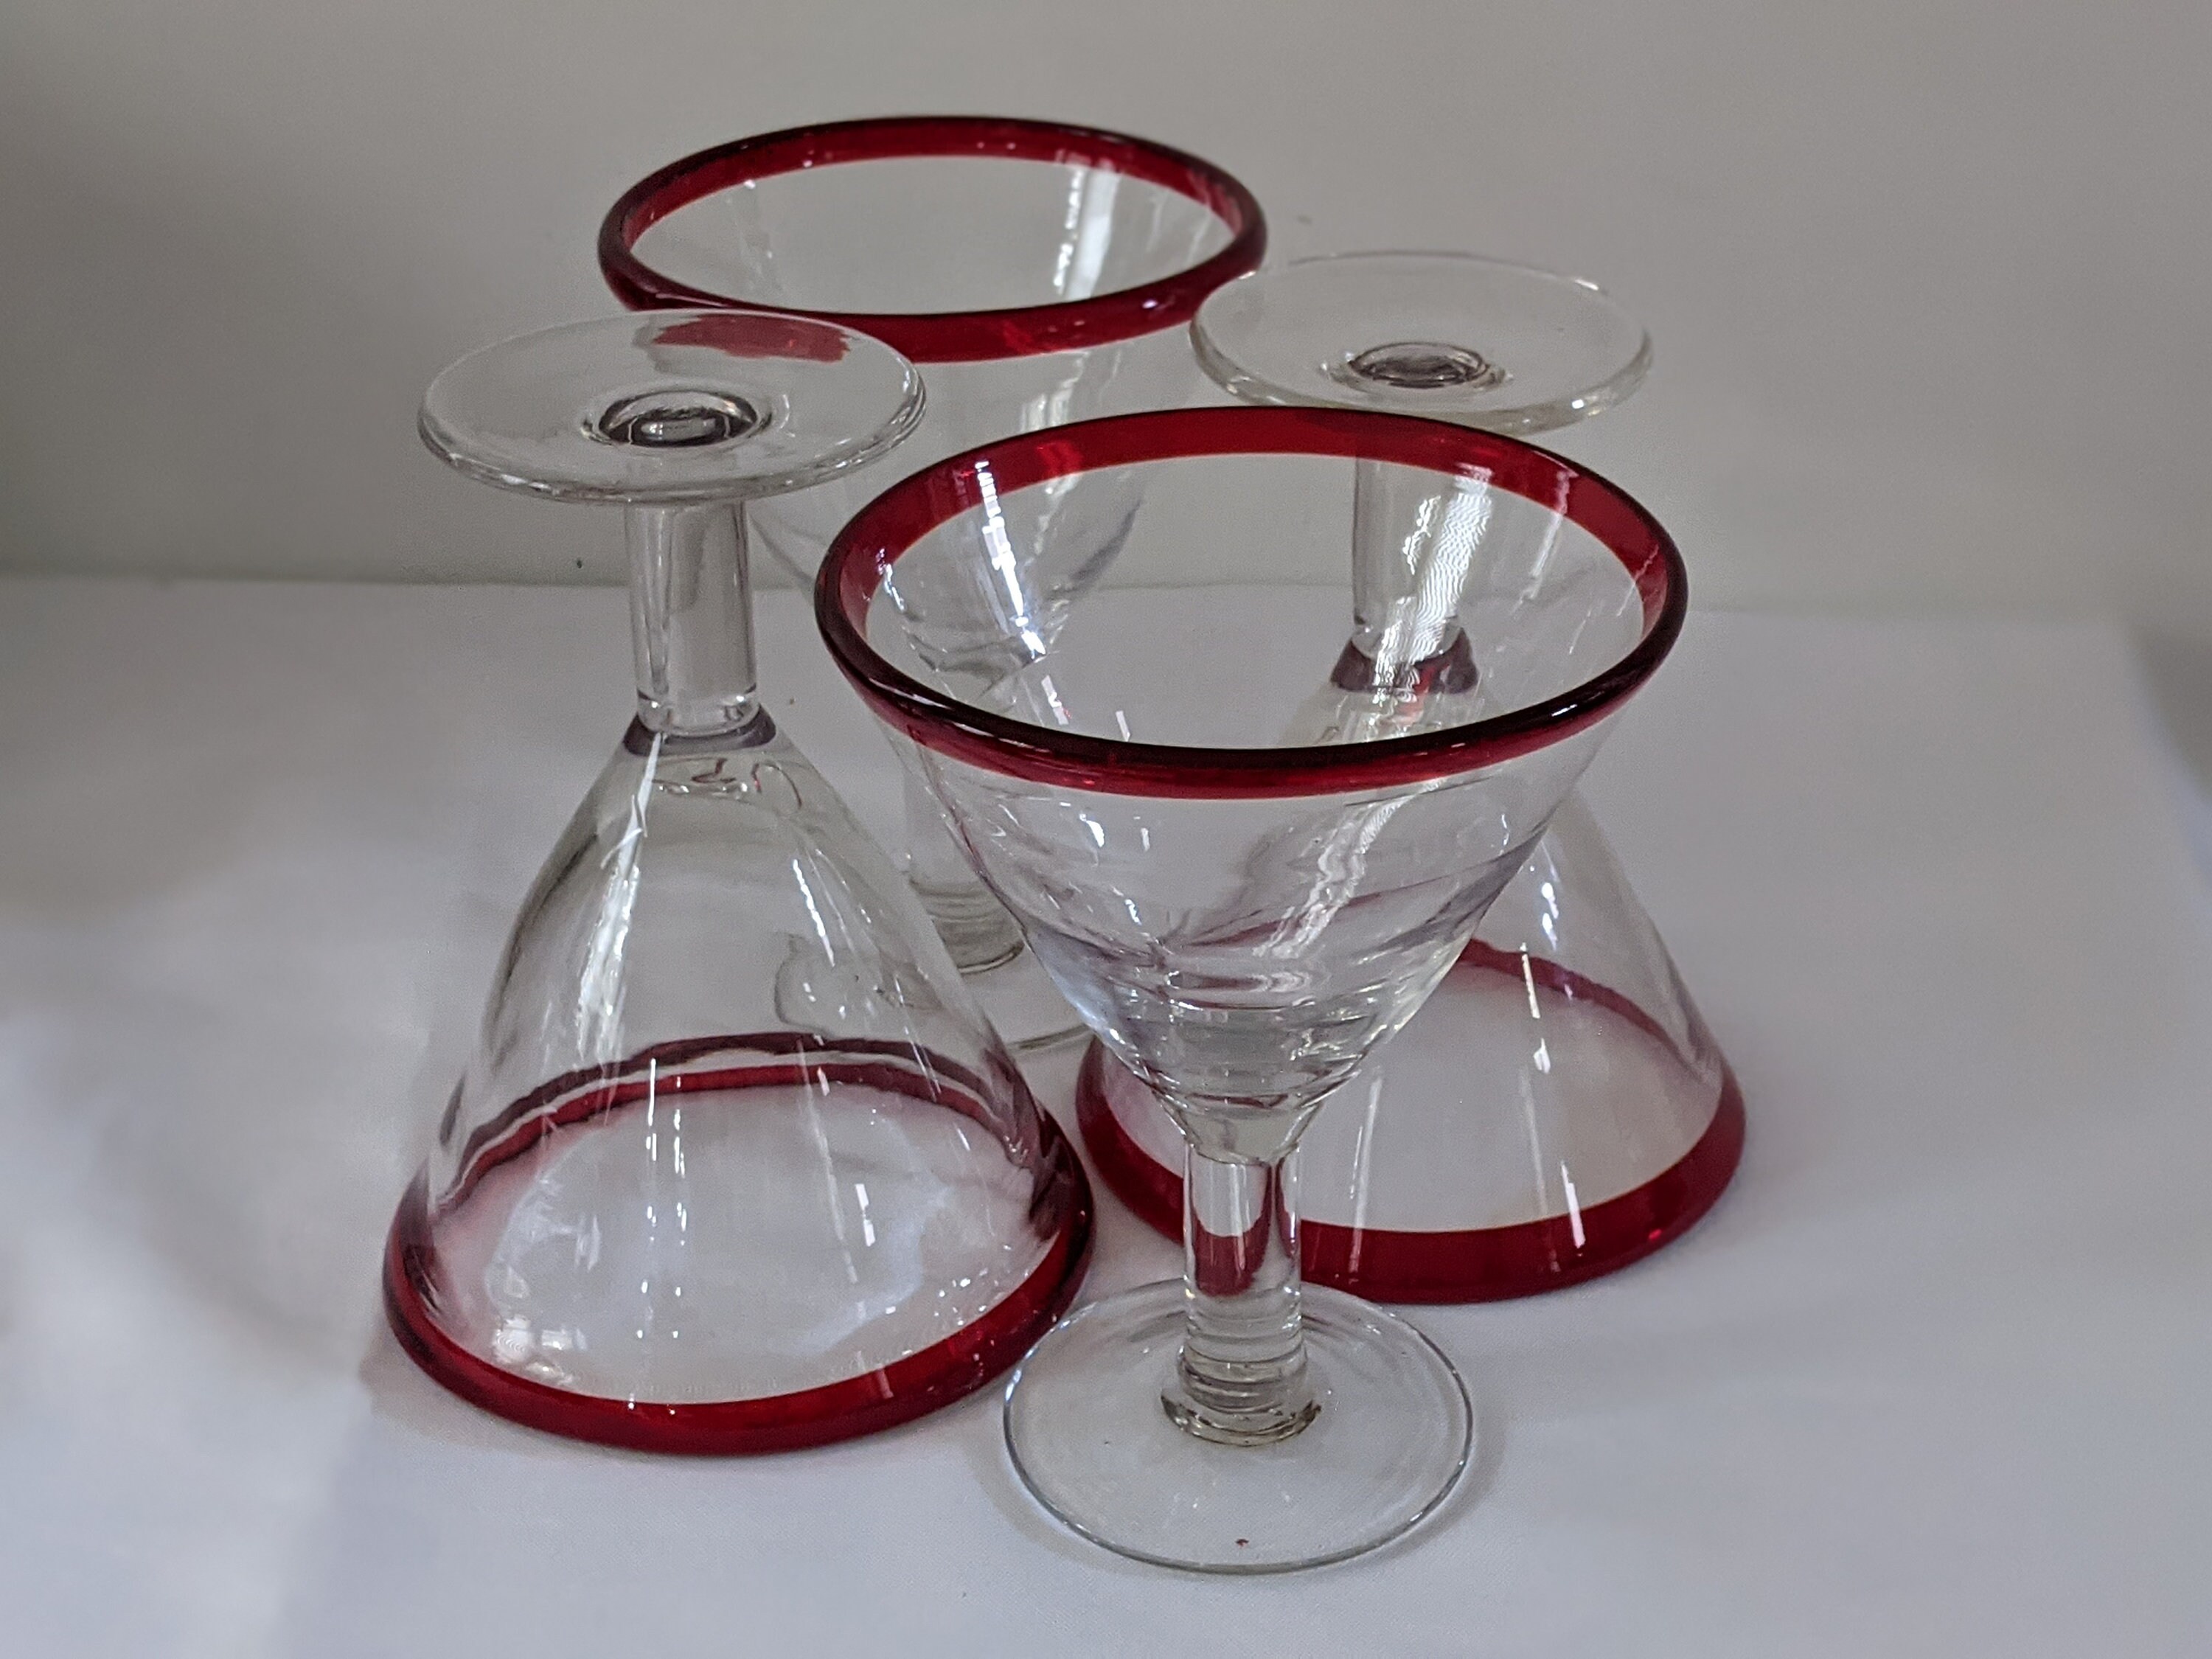 Giant Red Rimmed Martini Glass - Set of 2